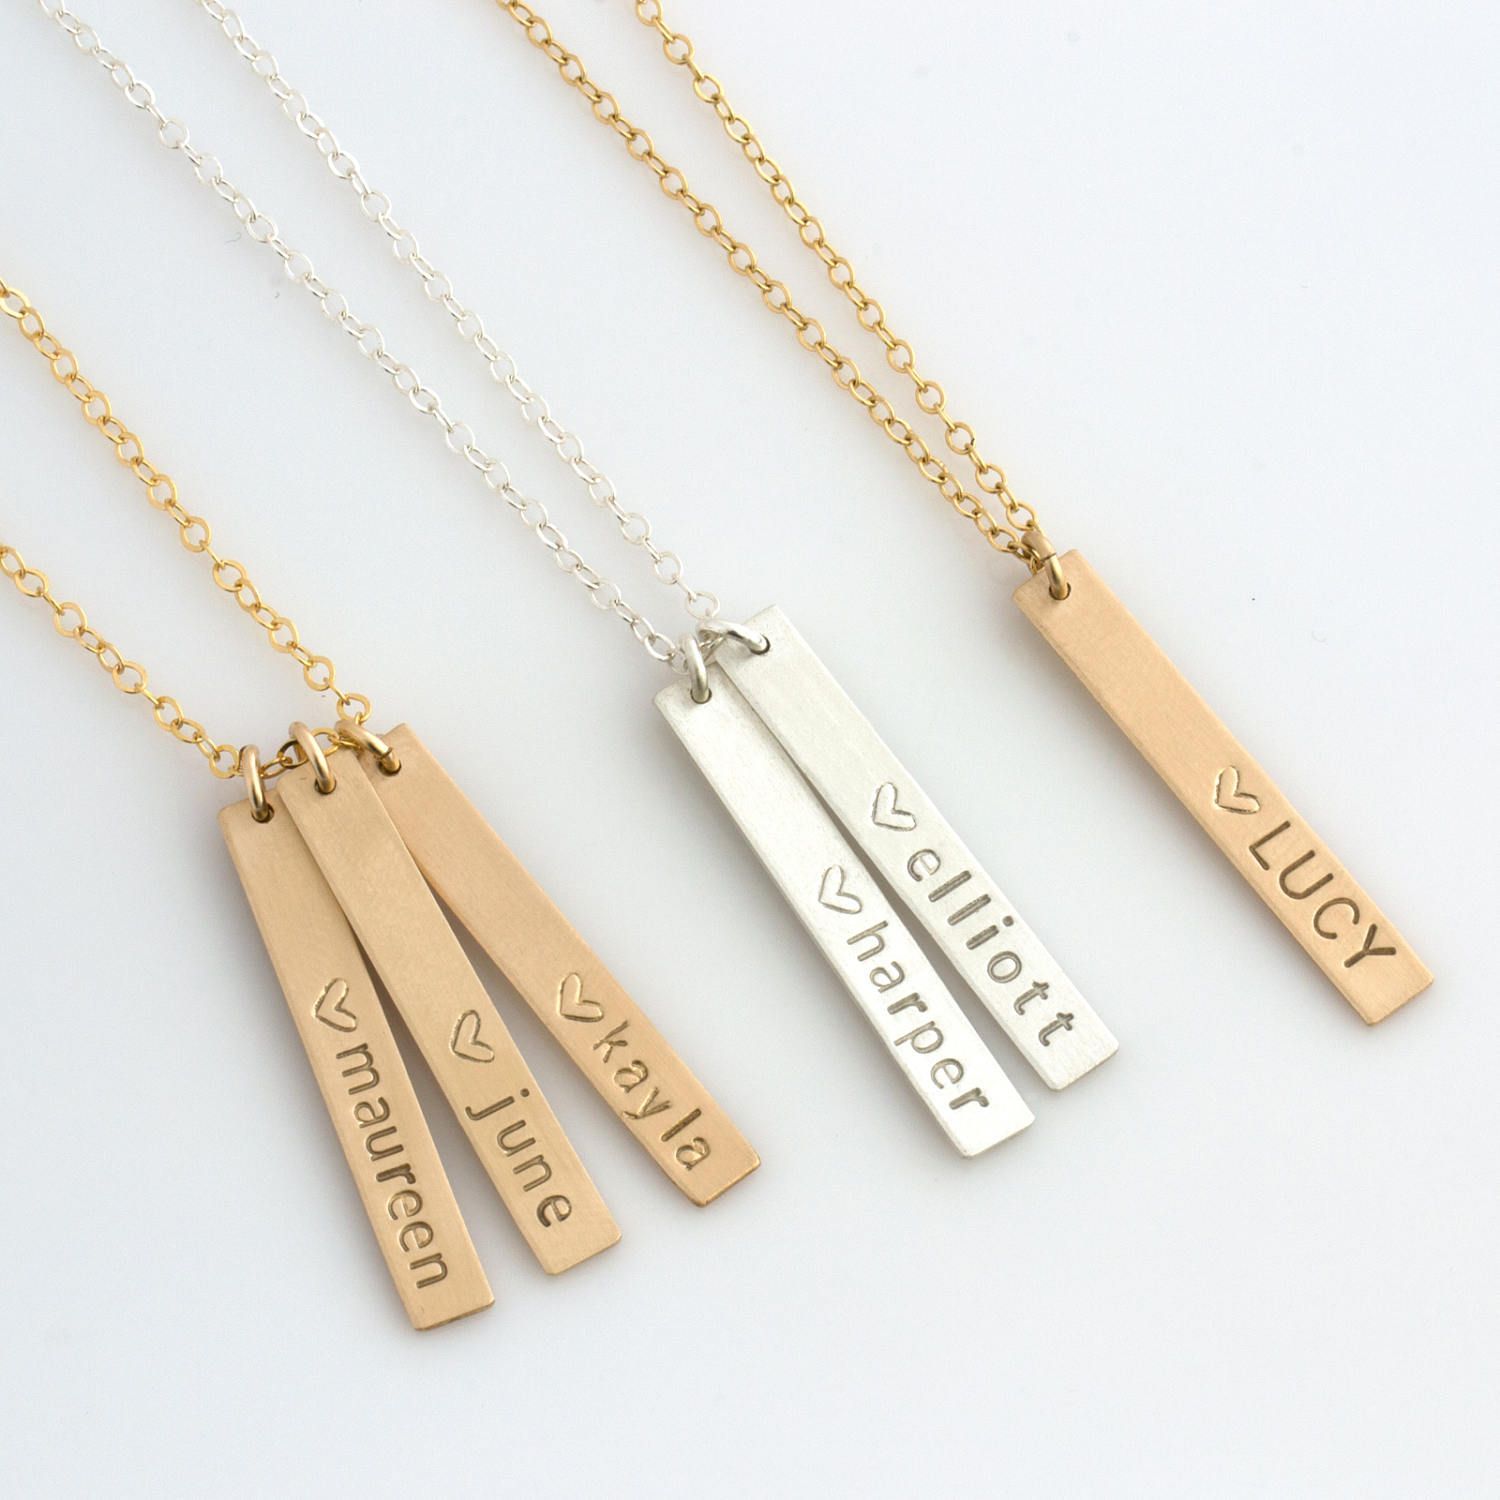 Skinny Vertical Bar Necklace,New Mom Necklace,Name Bar Necklace,Kids Names Necklace for mom,Gifts for Mom,LEILAJewelryShop,N209 -   25 diy necklace for mom
 ideas